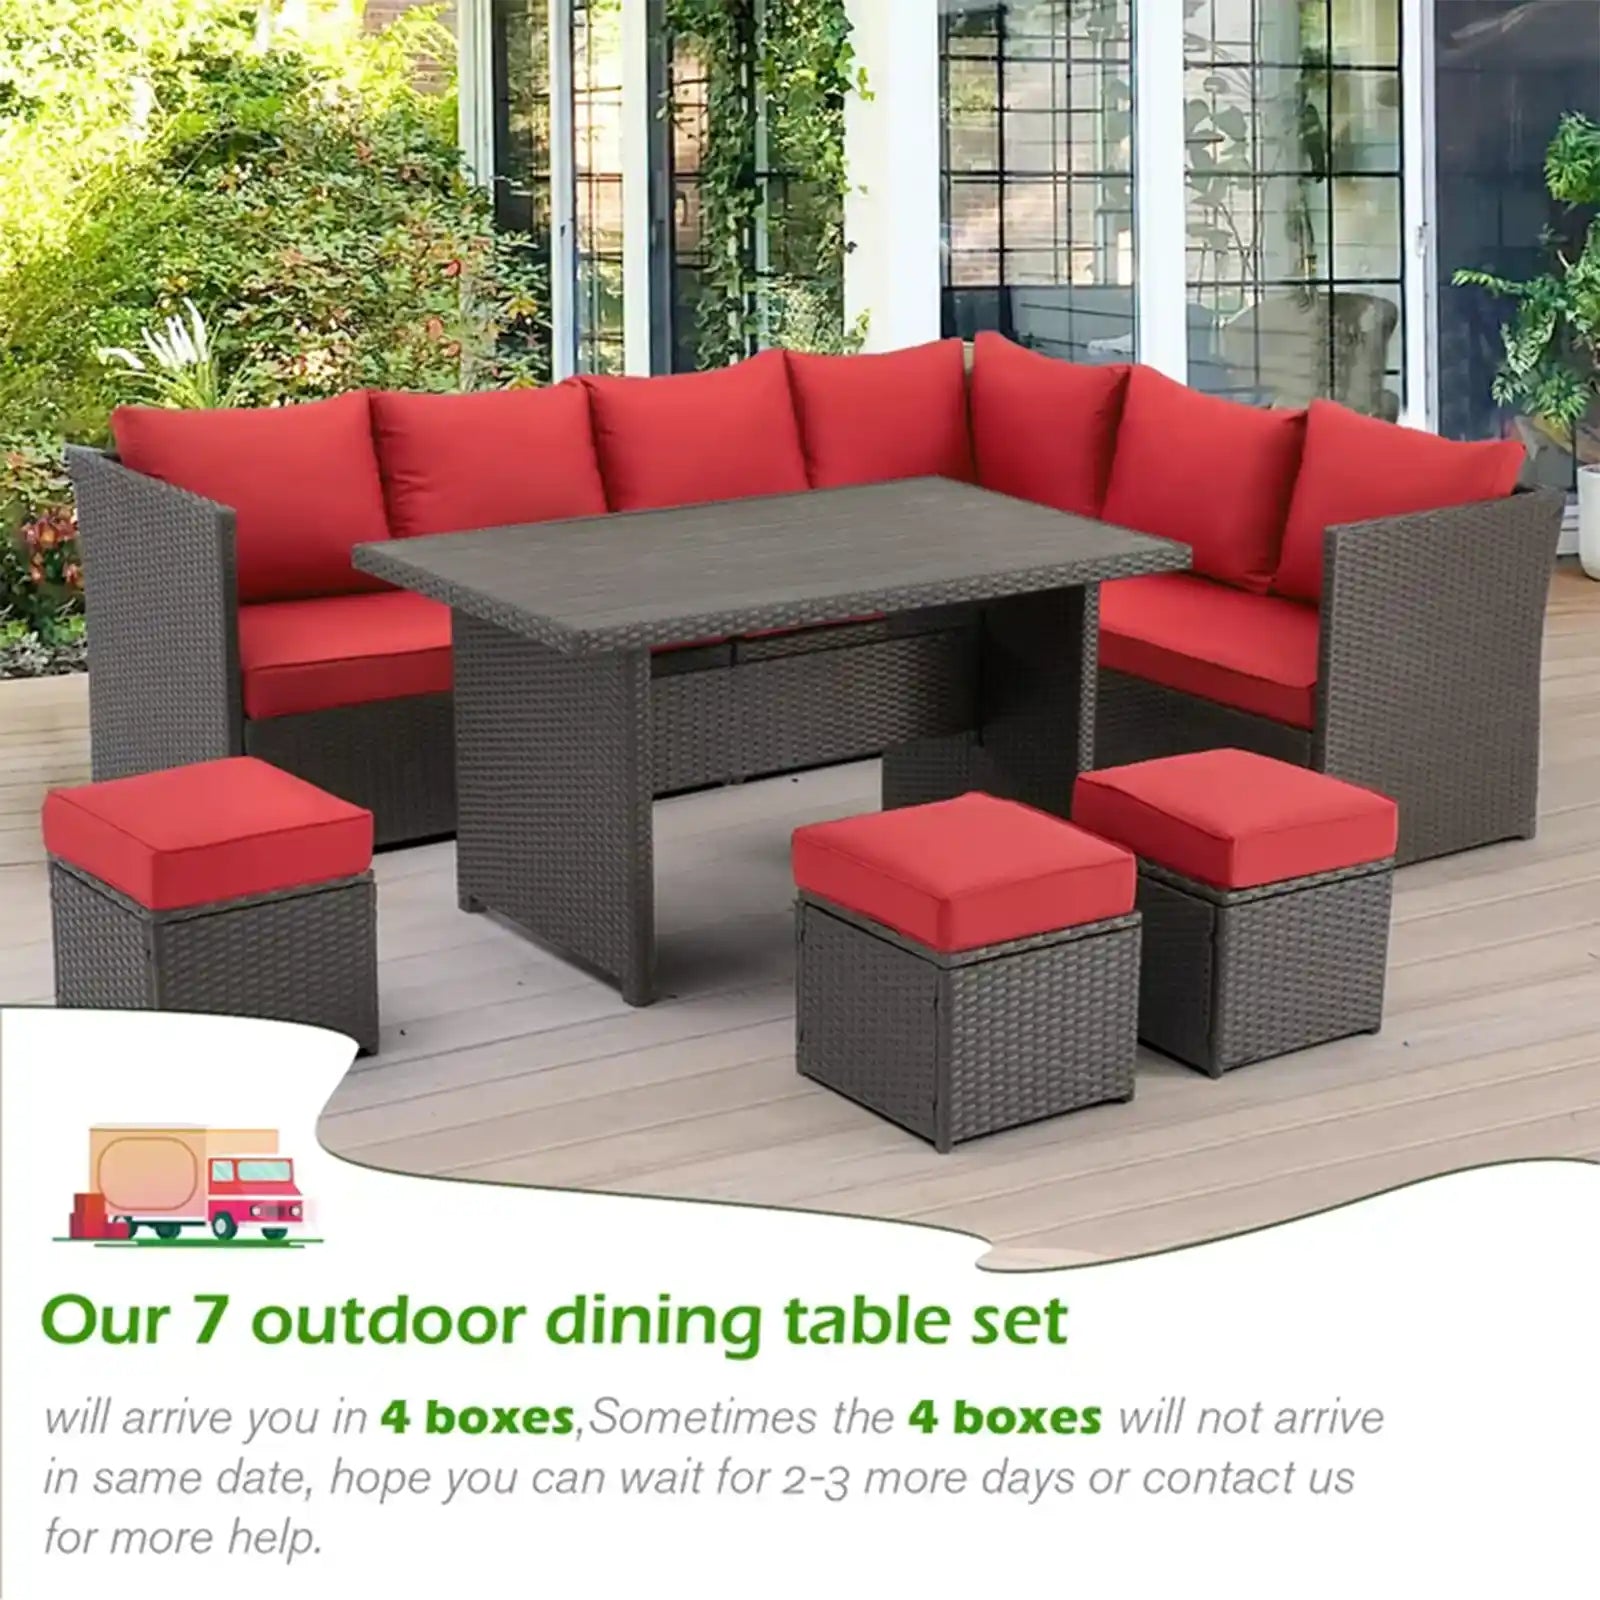 All-Weather Patio Dining Set with Protective Cover | Sturdy PE Rattan | High-Quality Cushions | Perfect for Outdoor Gatherings in the USA